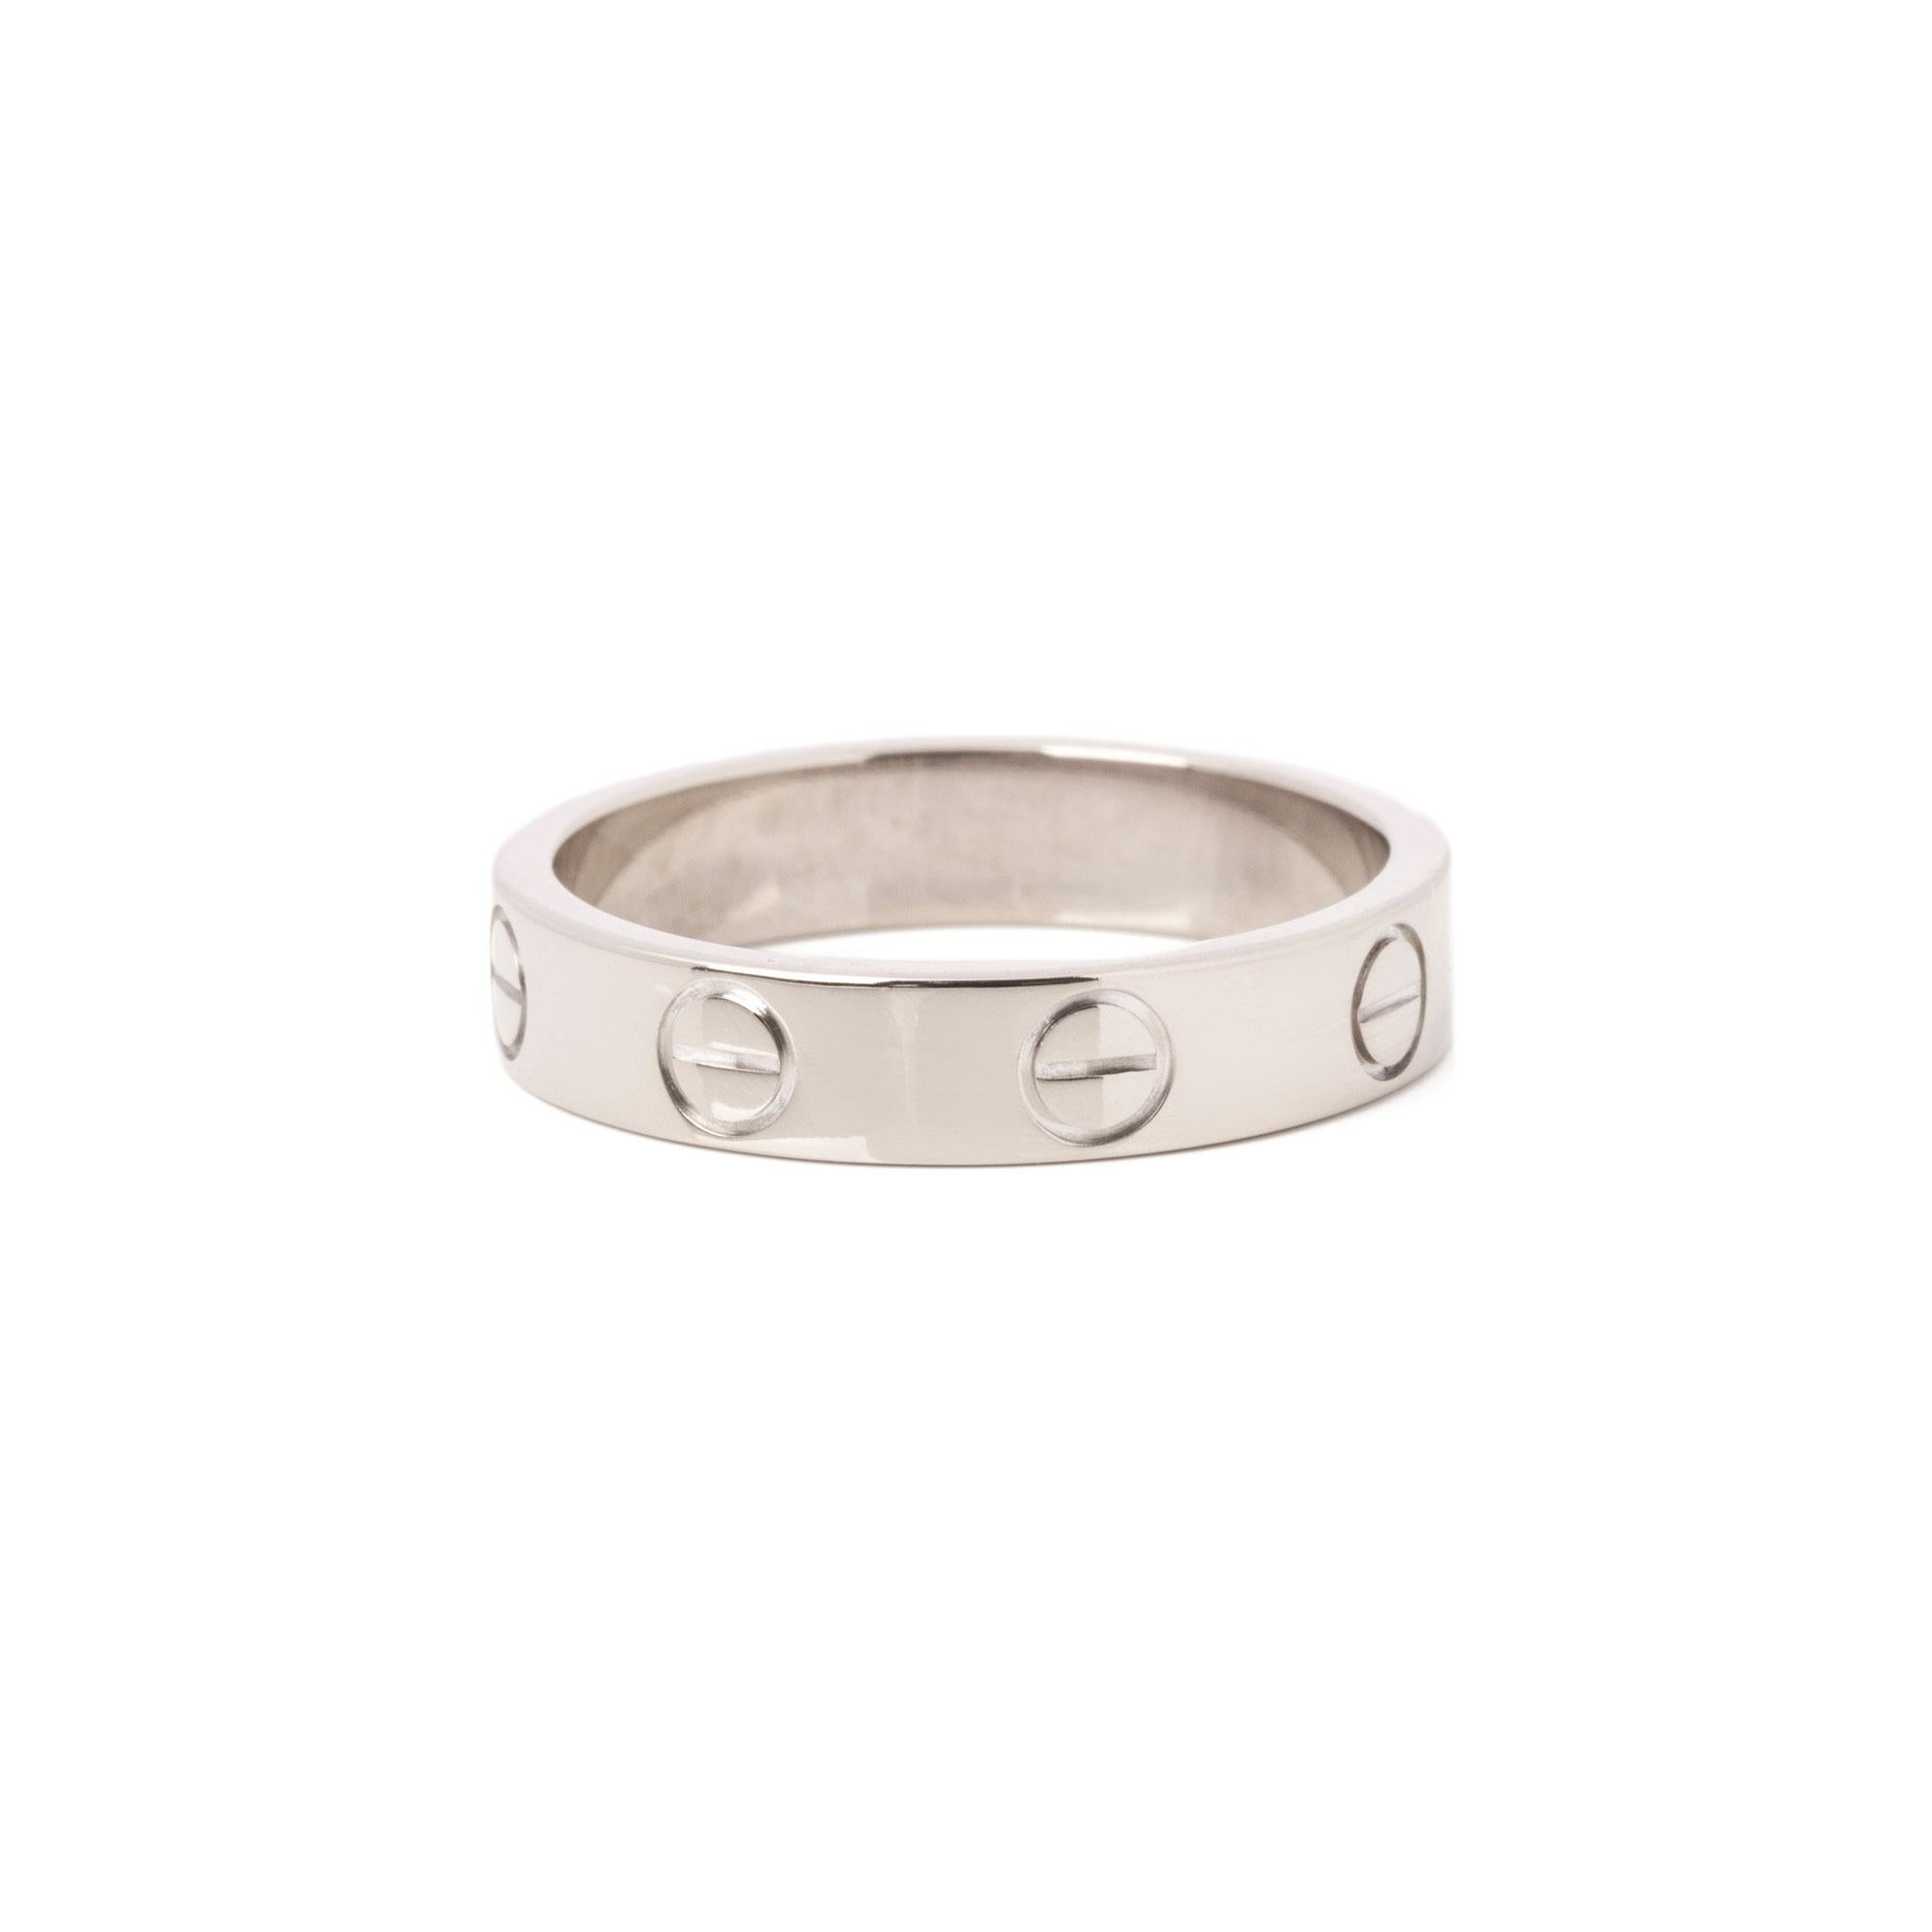 Cartier 18ct White Gold Love Wedding Band Ring In Excellent Condition For Sale In Bishop's Stortford, Hertfordshire